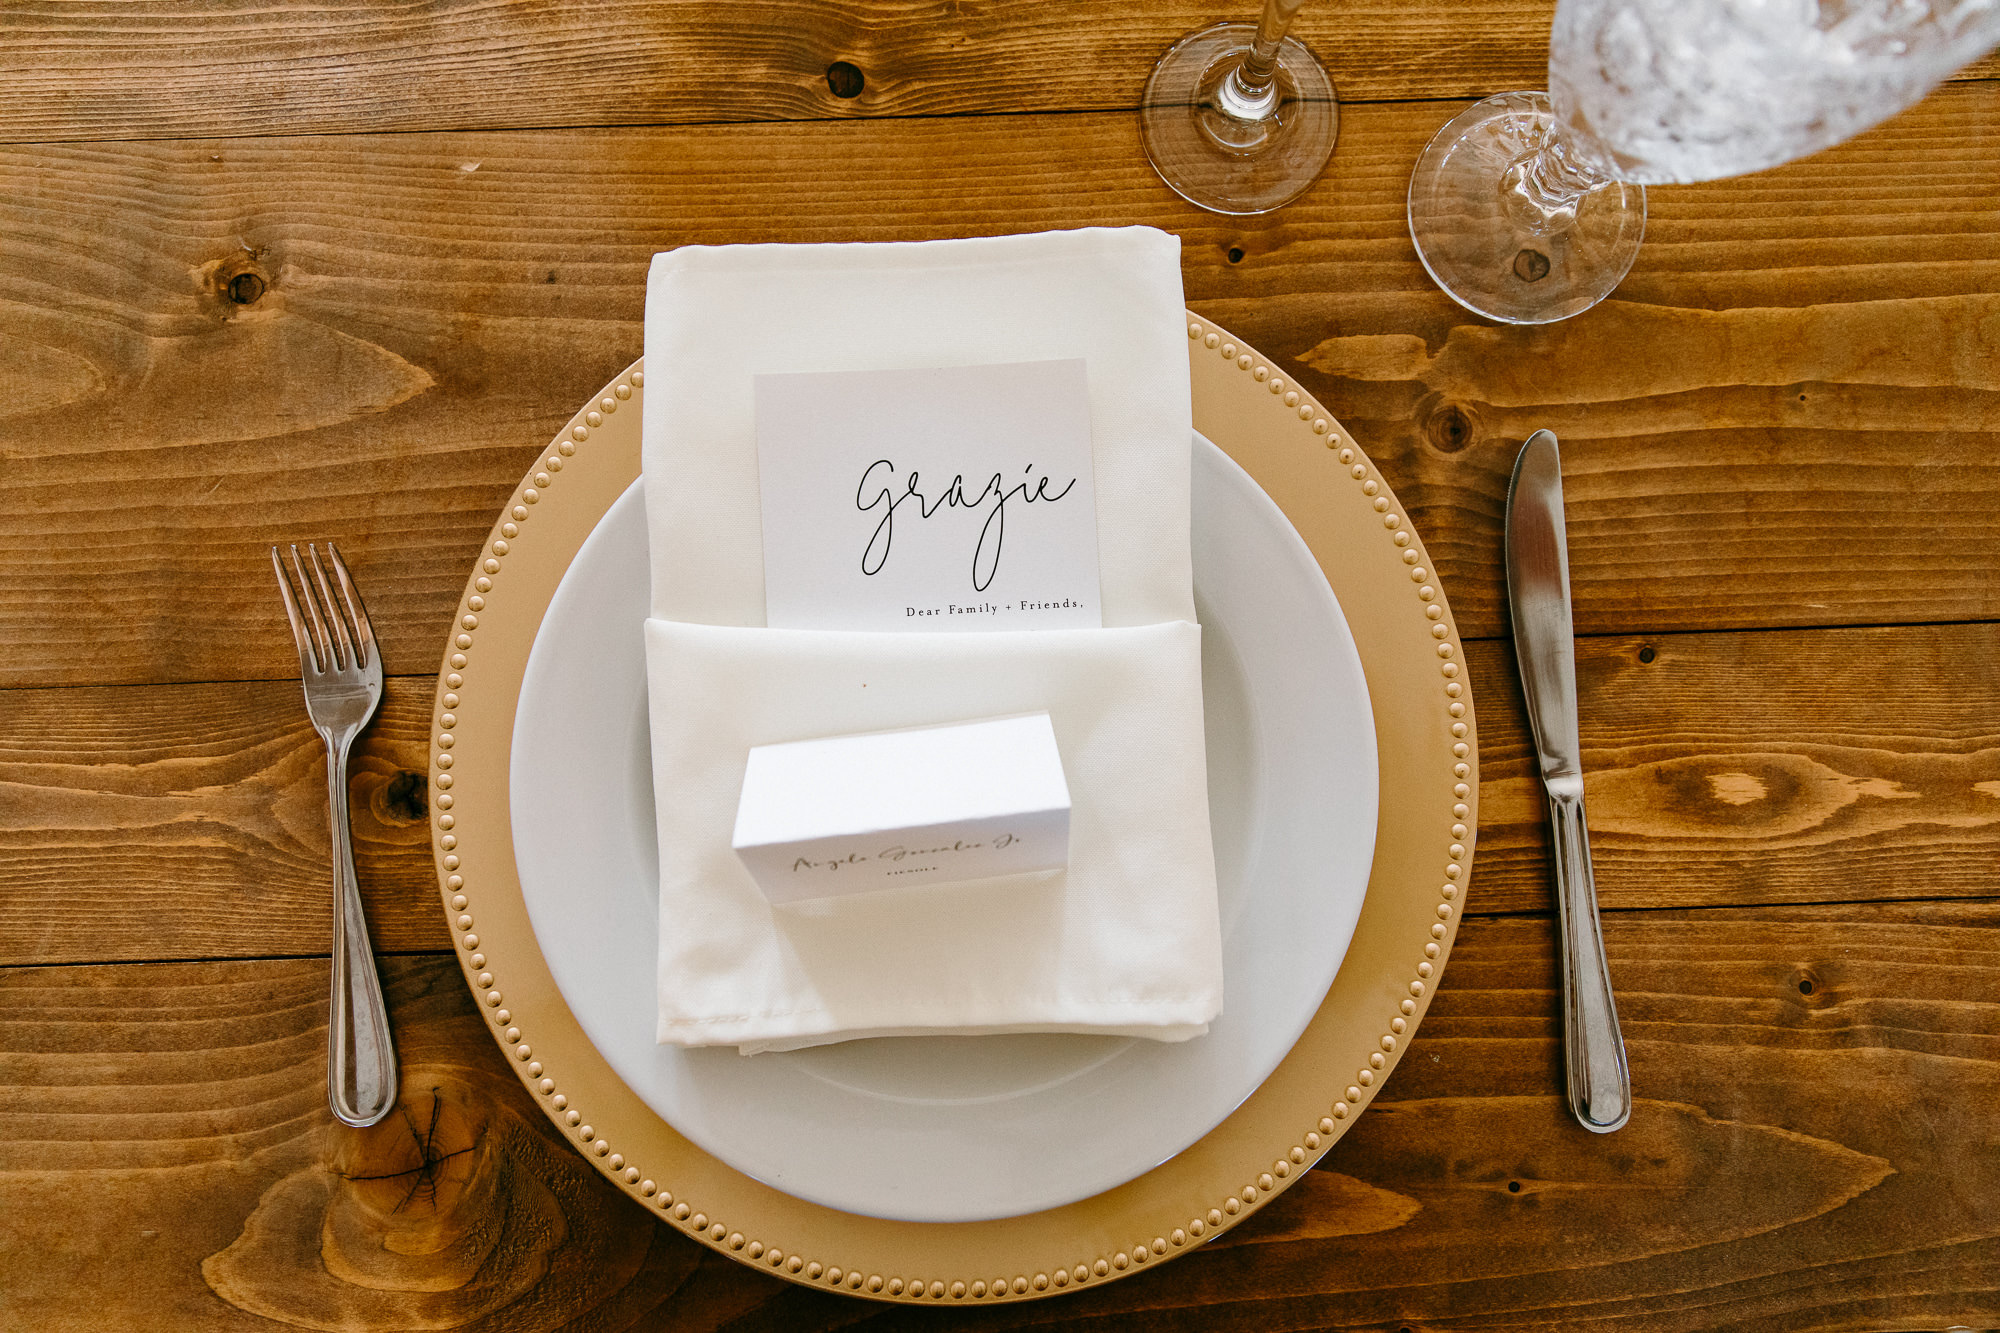 Rustic Elegant Wedding Reception Decor, Gold Charger, White and Black Card Stock Menu "Grazie" | Tampa Bay Wedding Rentals Outside the Box Rentals